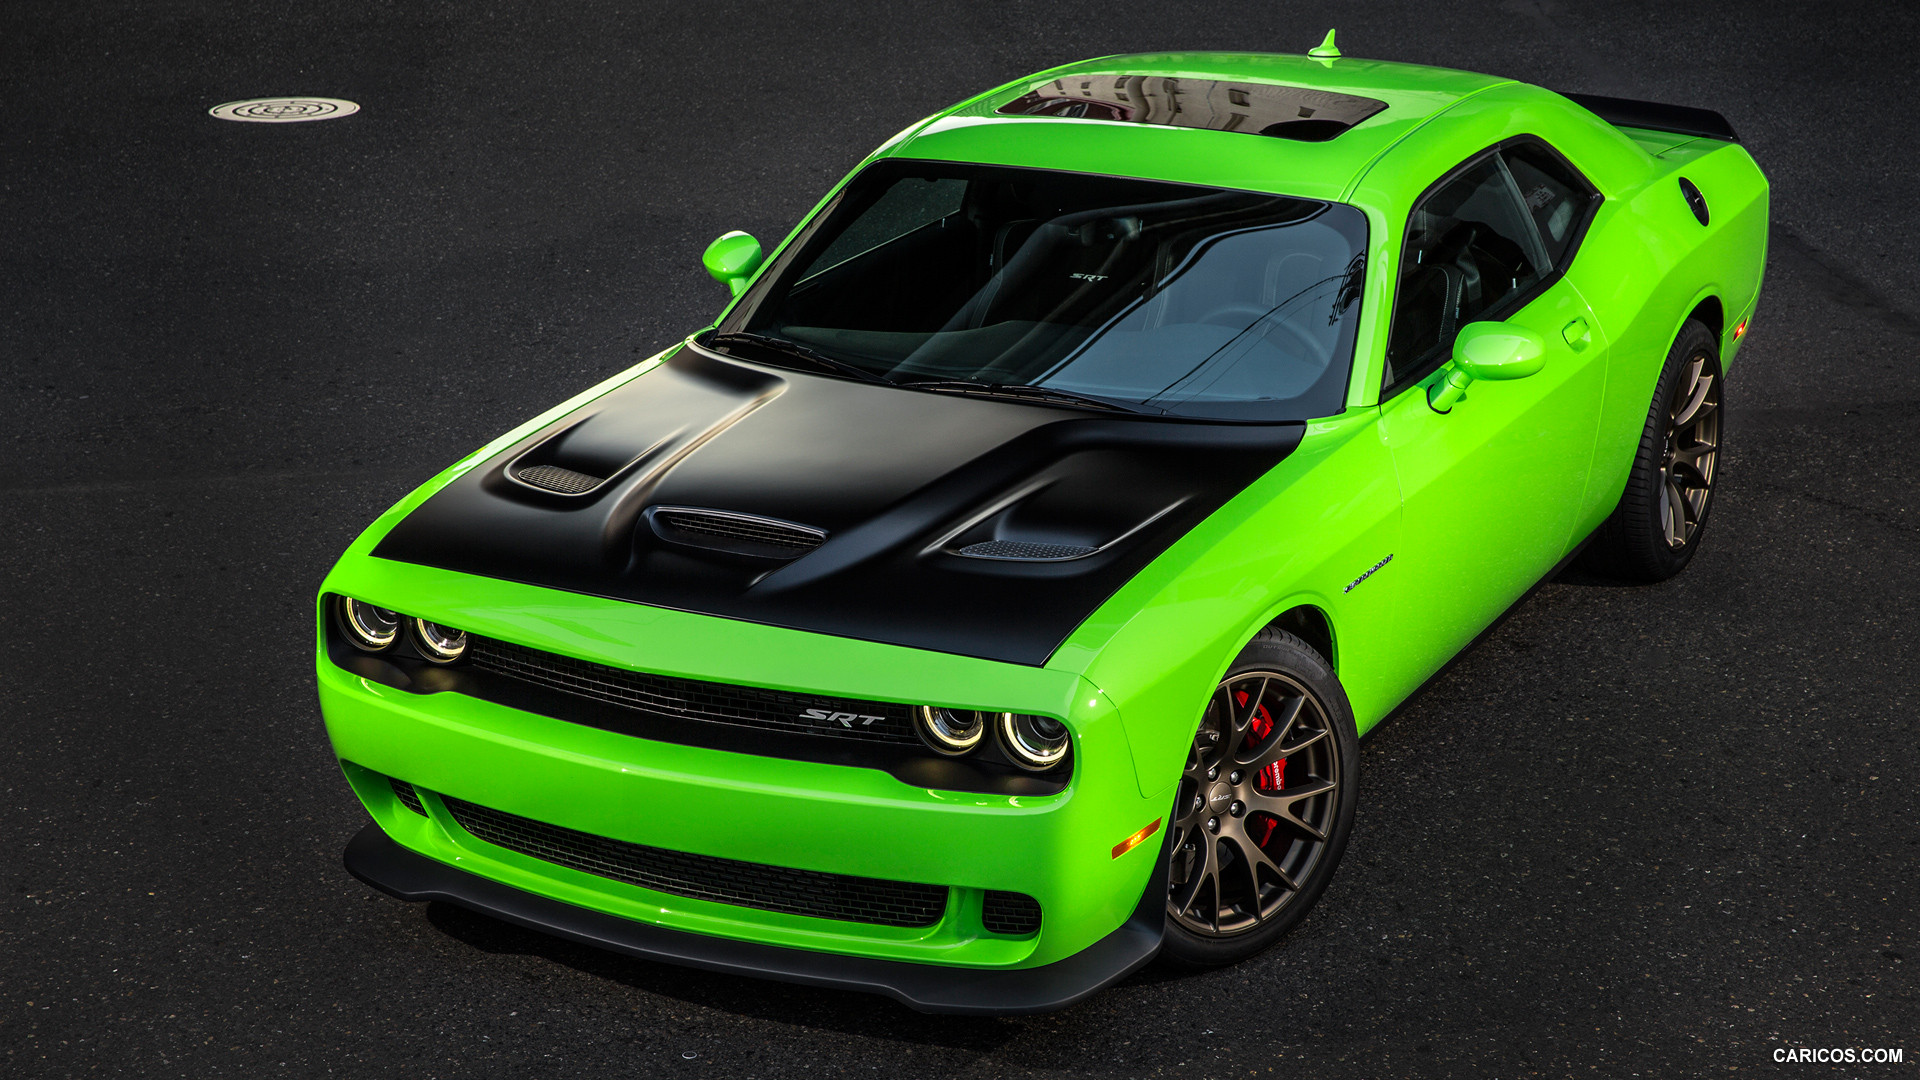 Dodge Challenger Hellcat Engine Before The Heat Of